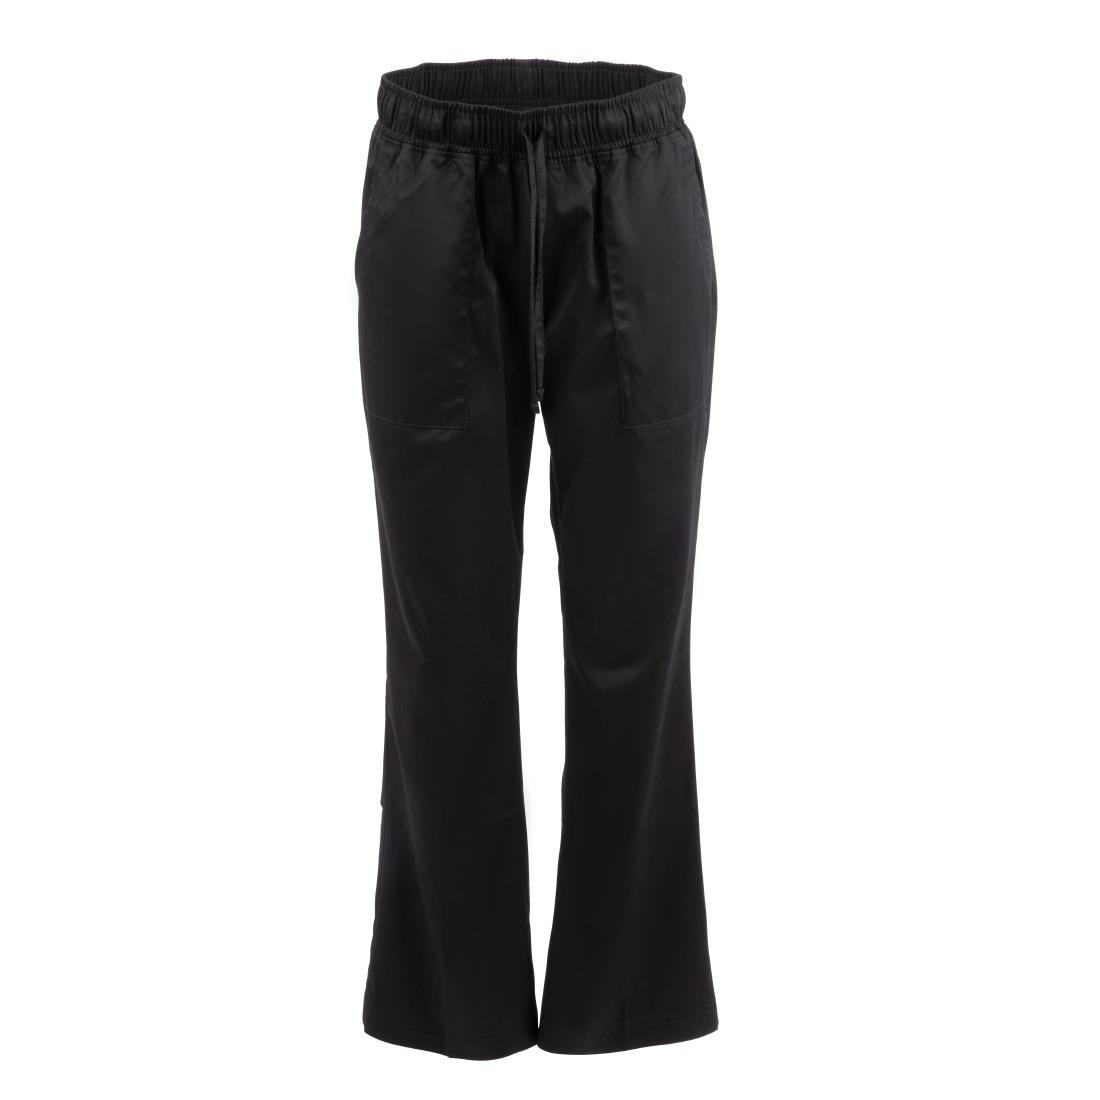 A431-XS Chef Works Womens Executive Chef Trousers Black XS